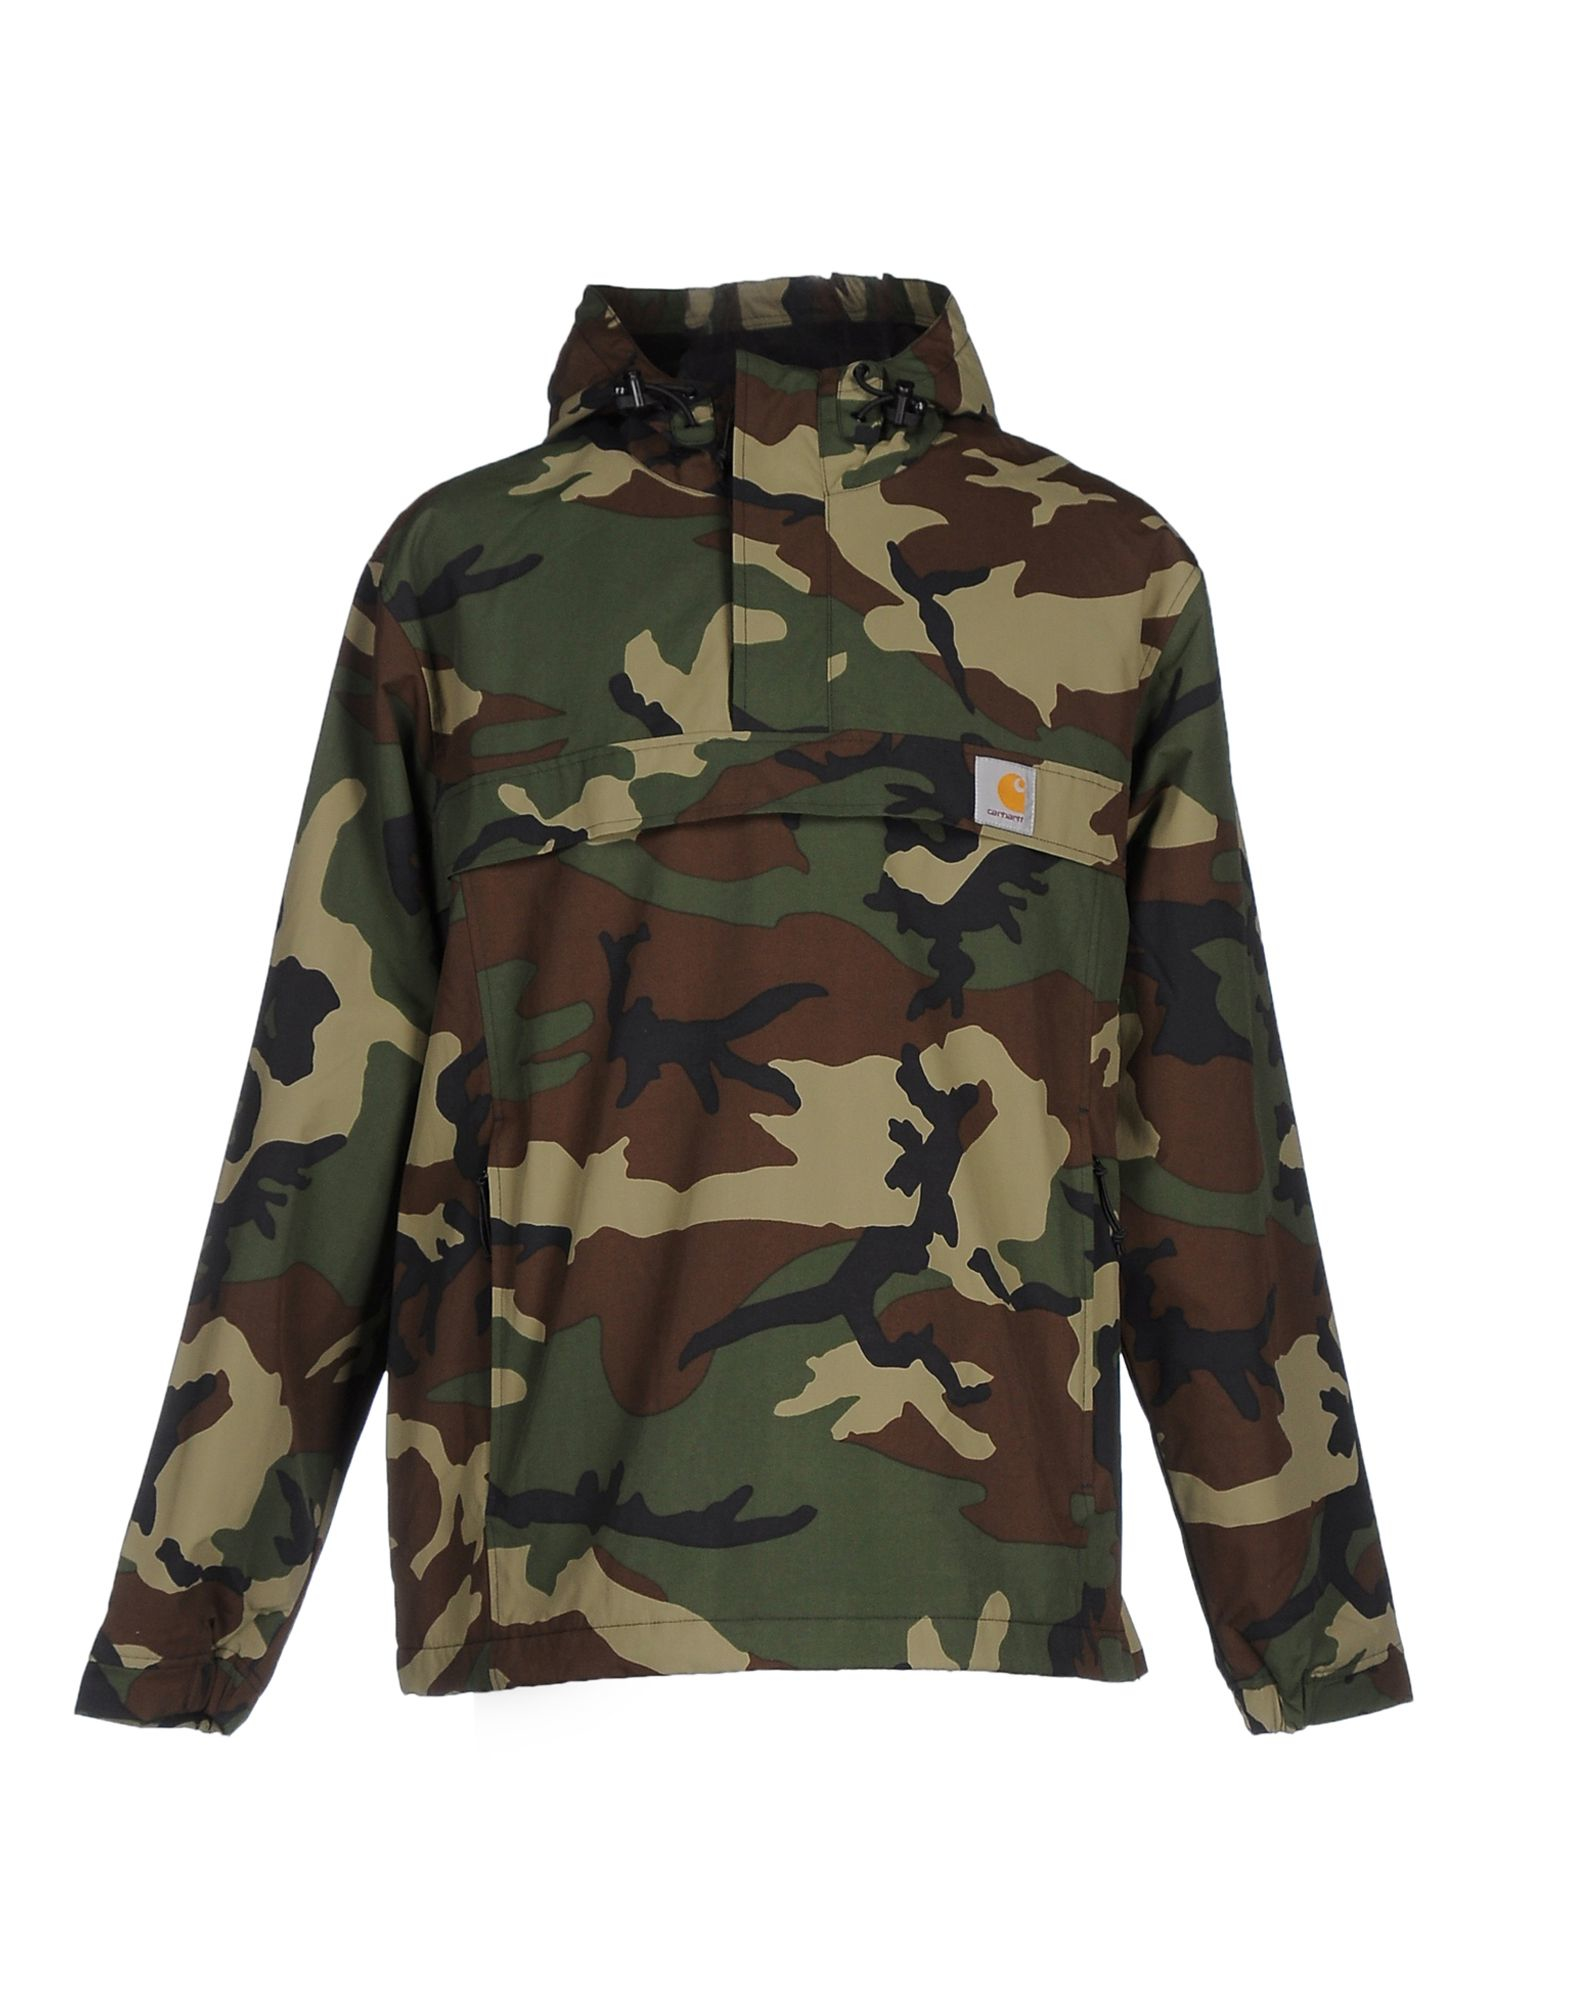 Carhartt Military Camouflage Jacket in Green for Men - Lyst